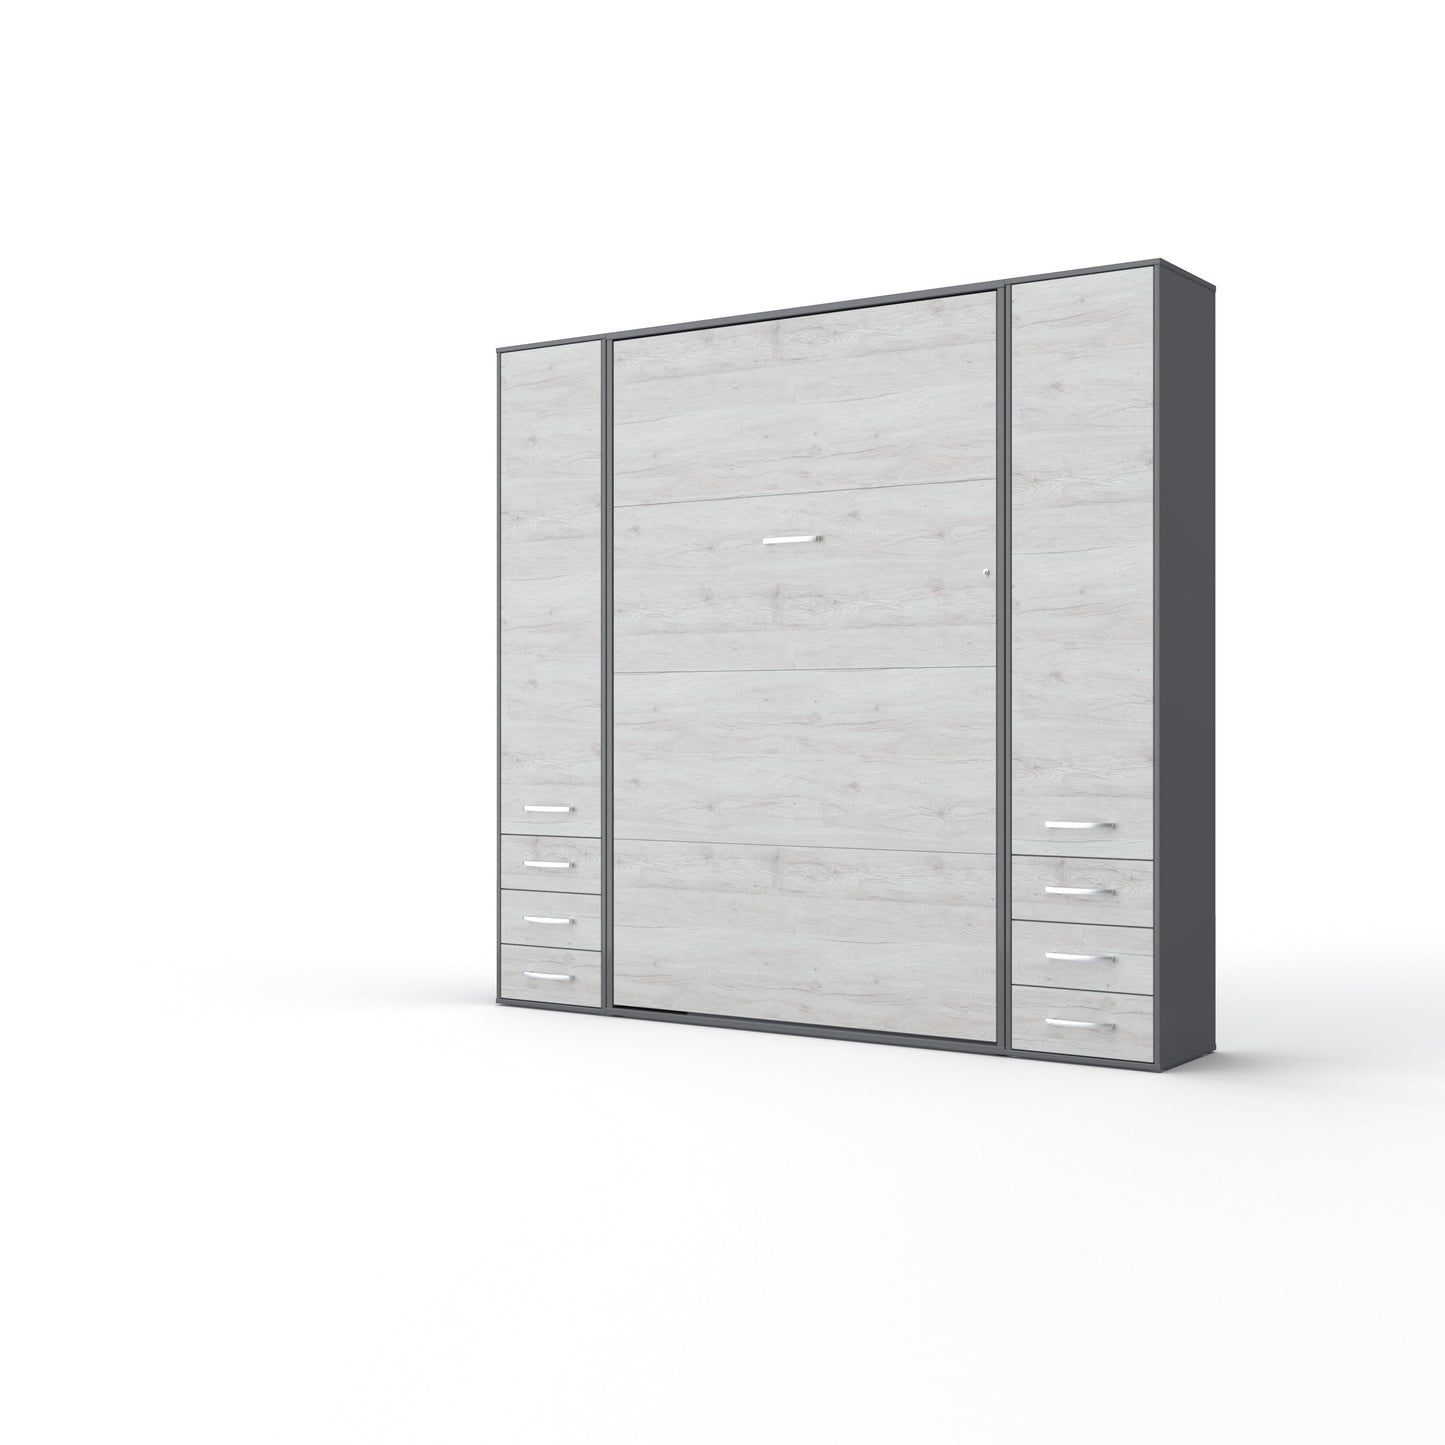 Maxima House Vertical Murphy Bed Invento , European Full Size with 2 cabinets Grey/White Monaco IN120V-07GW